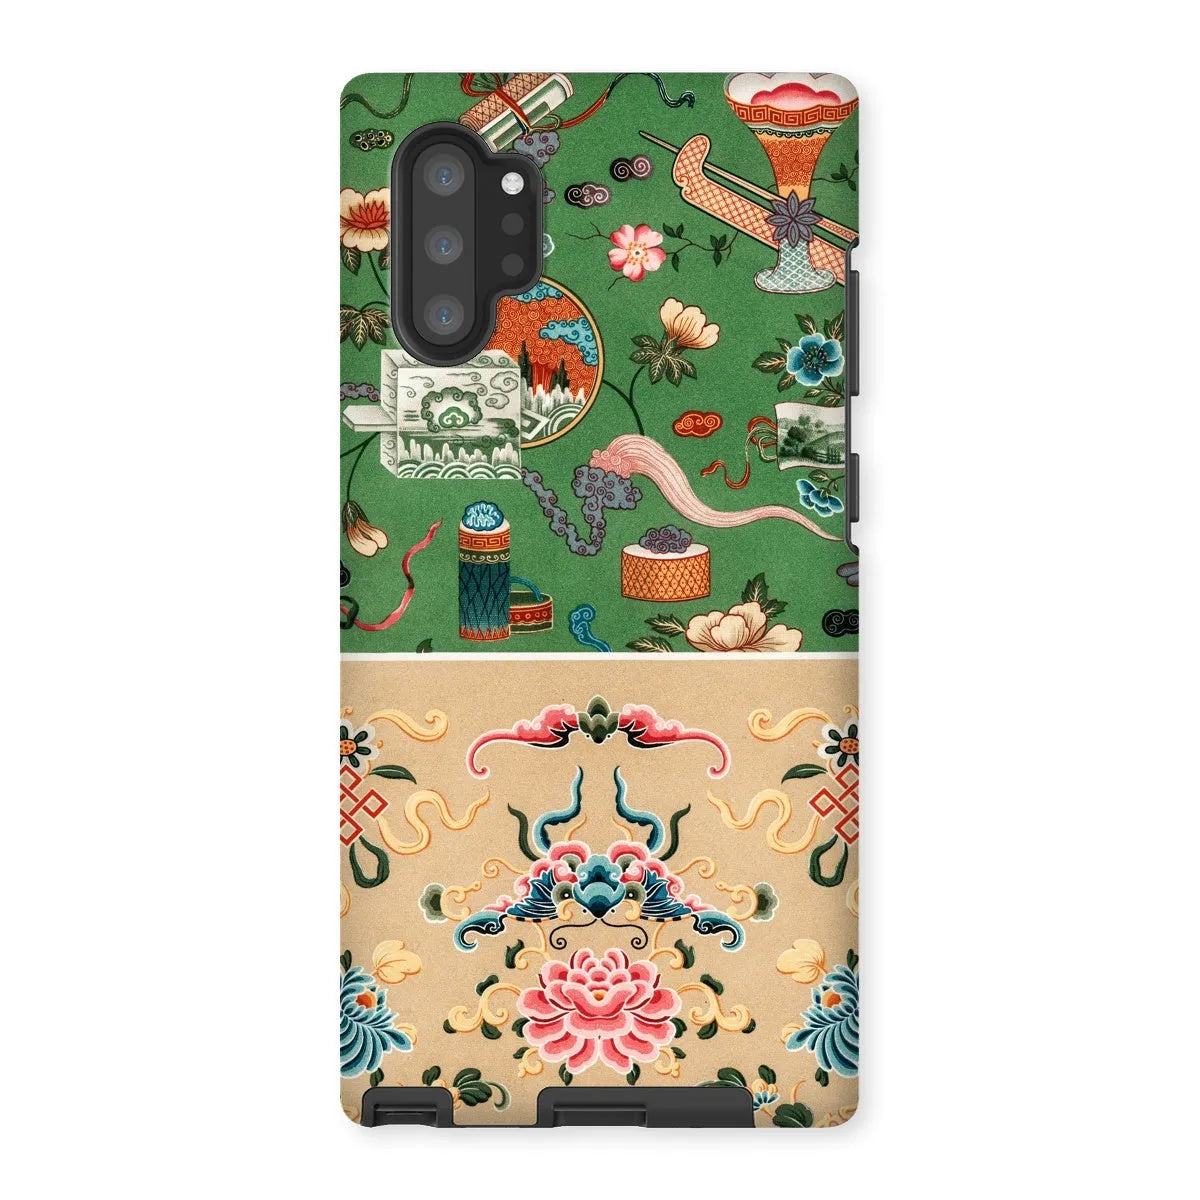 This Chinese Pattern By Auguste Racinet Tough Phone Case - Samsung Galaxy Note 10p / Matte - Mobile Phone Cases